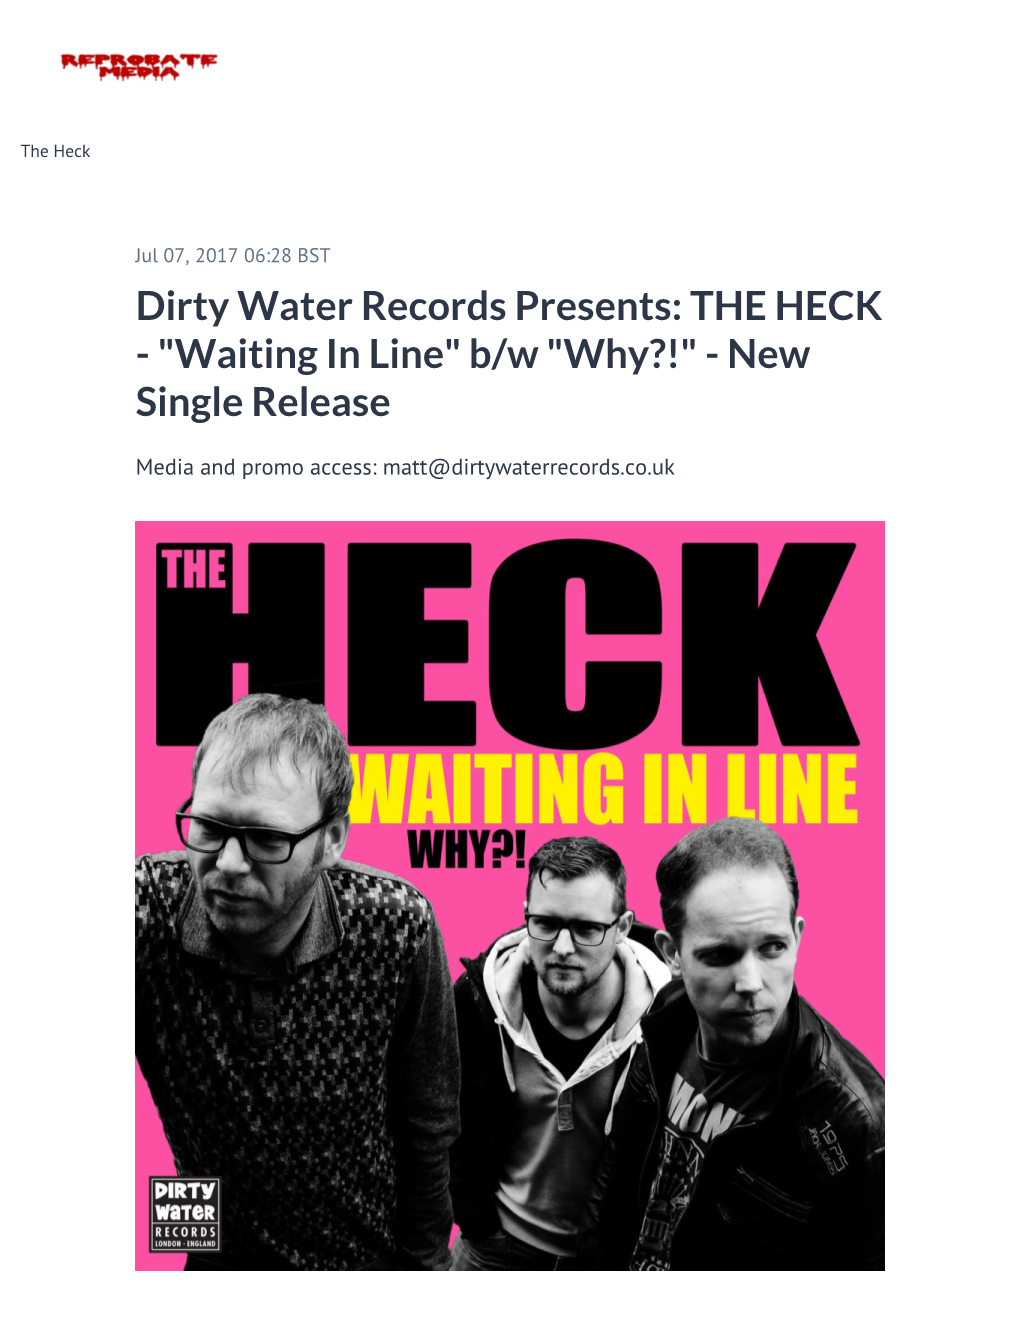 Dirty Water Records Presents: the HECK - "Waiting in Line" B/W "Why?!" - New Single Release